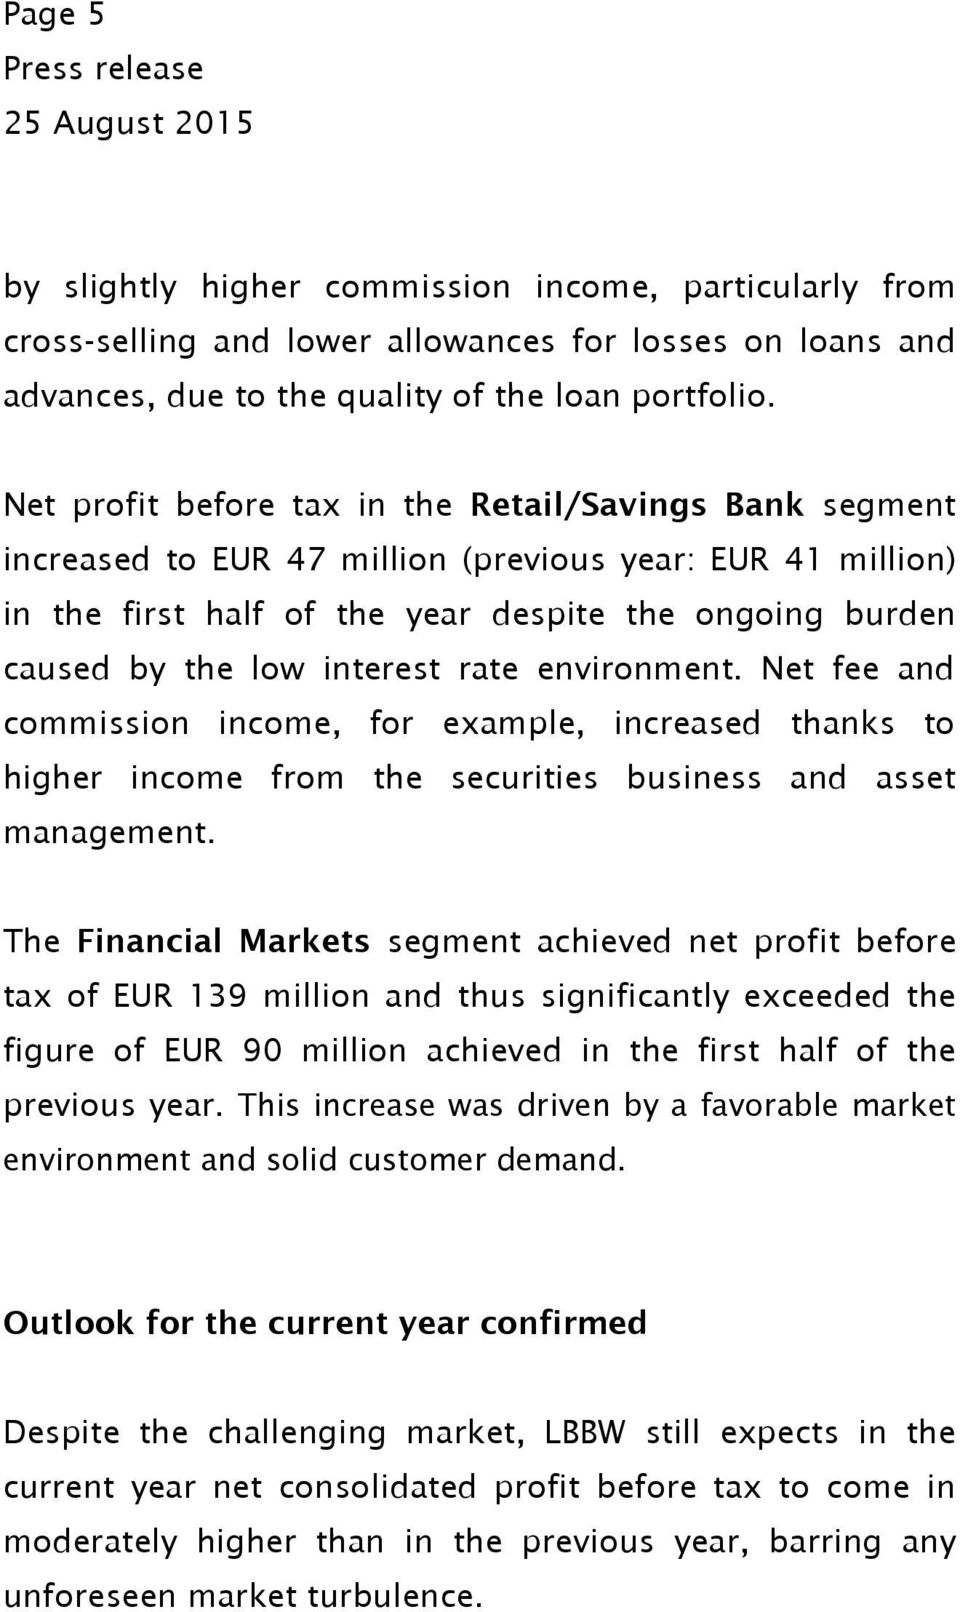 interest rate environment. Net fee and commission income, for example, increased thanks to higher income from the securities business and asset management.